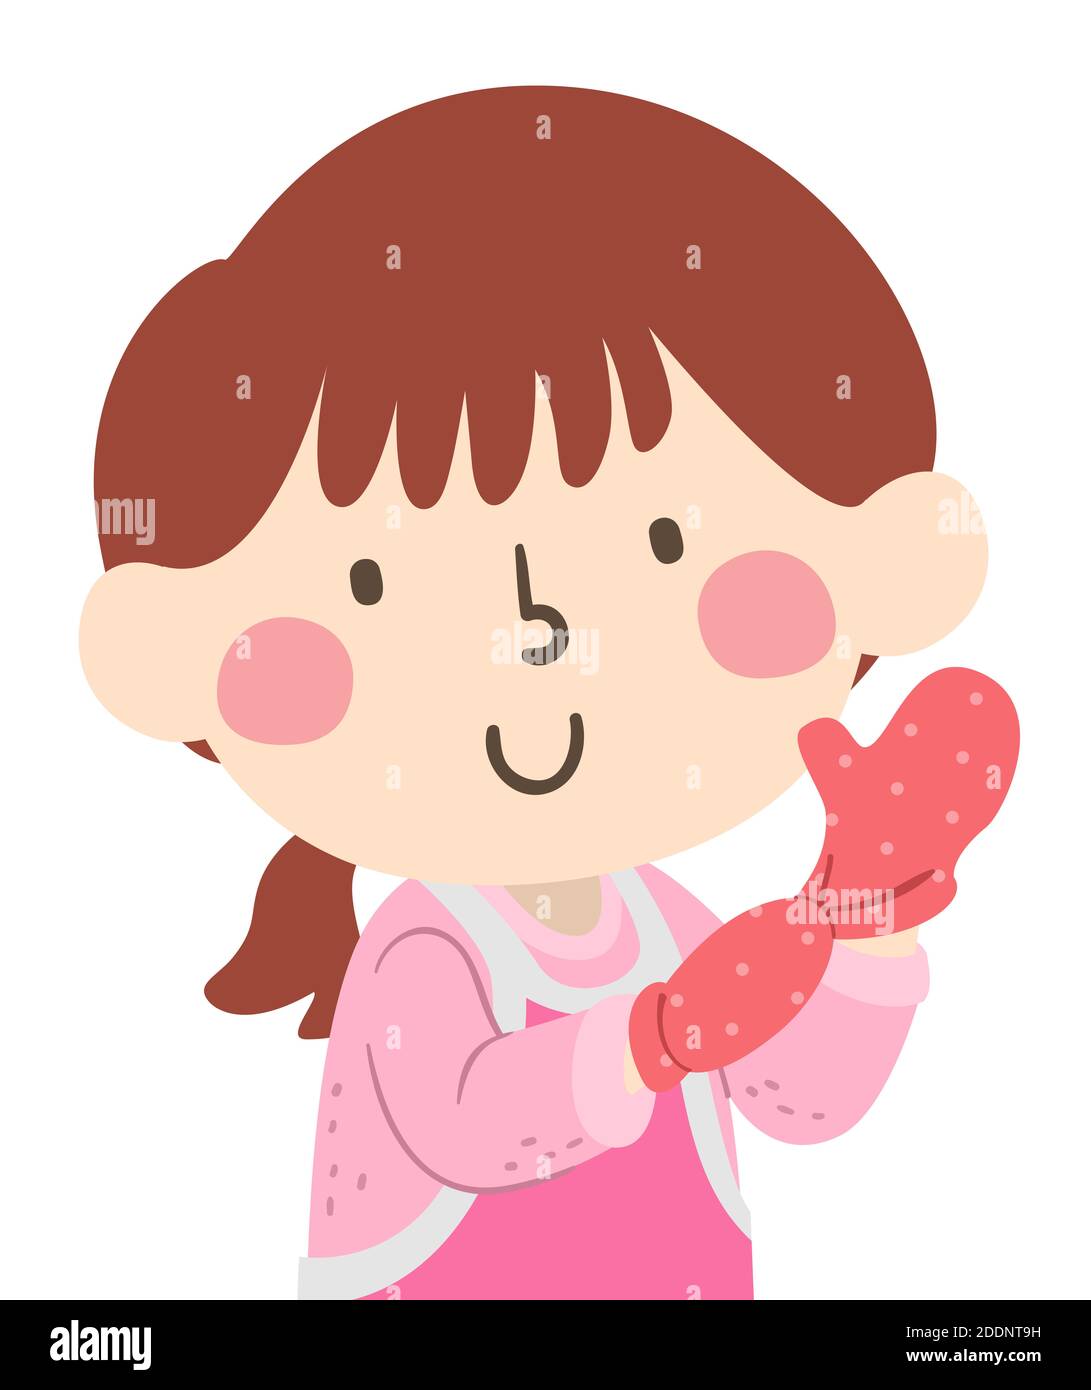 Illustration of a Kid Girl Wearing Apron and Putting on Oven Gloves for Baking Stock Photo